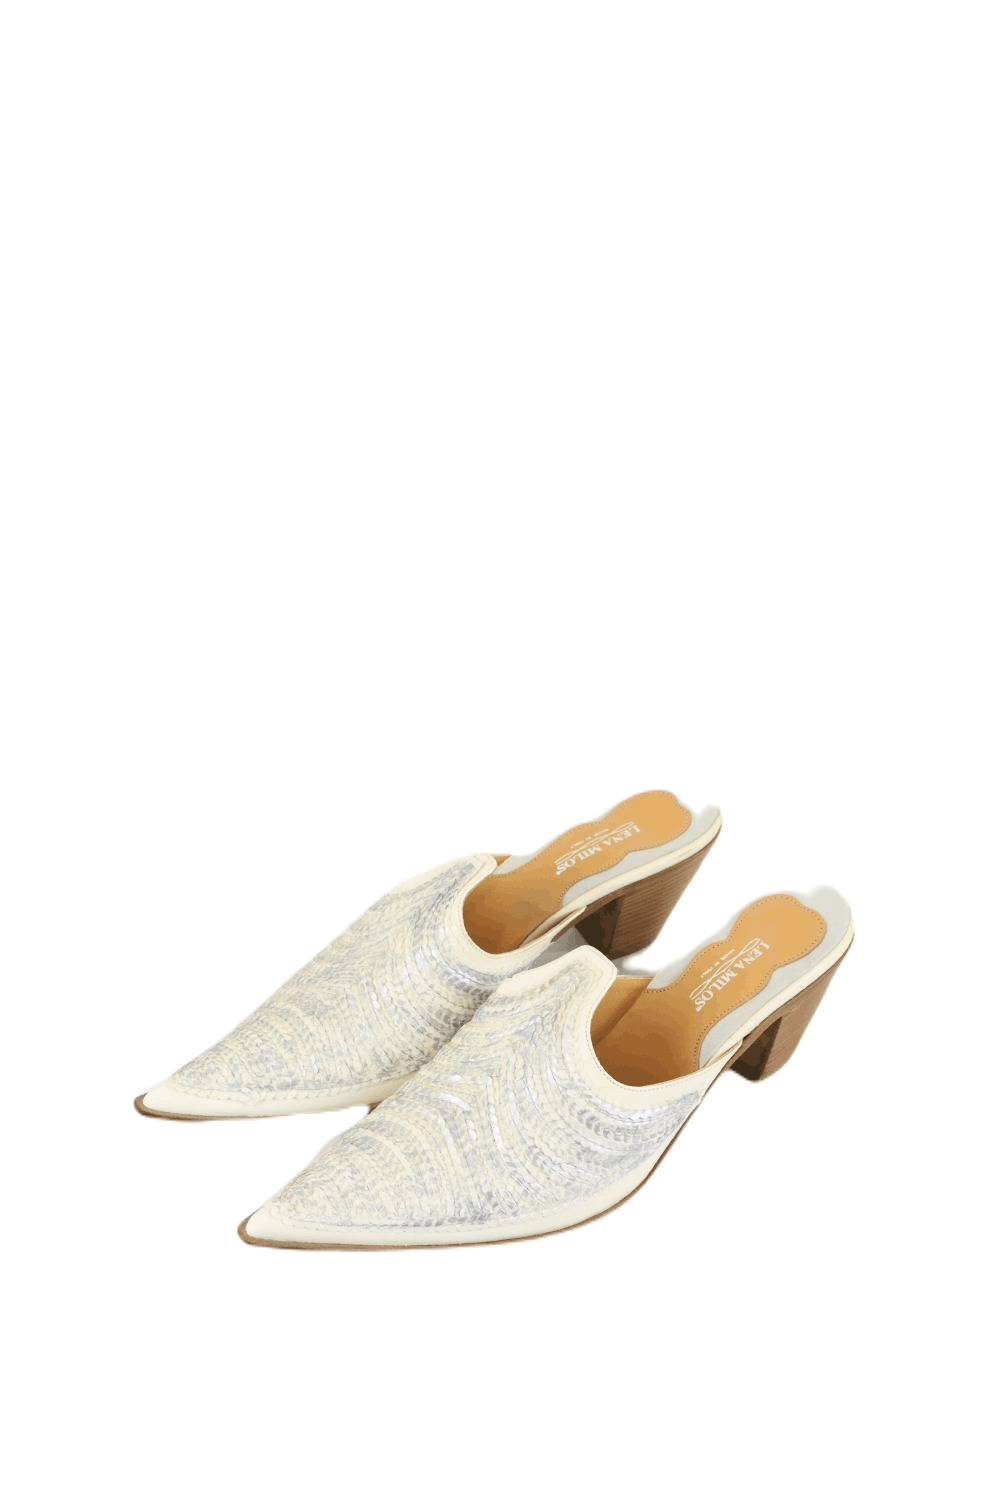 Lena Milos White And Silver Mules 9